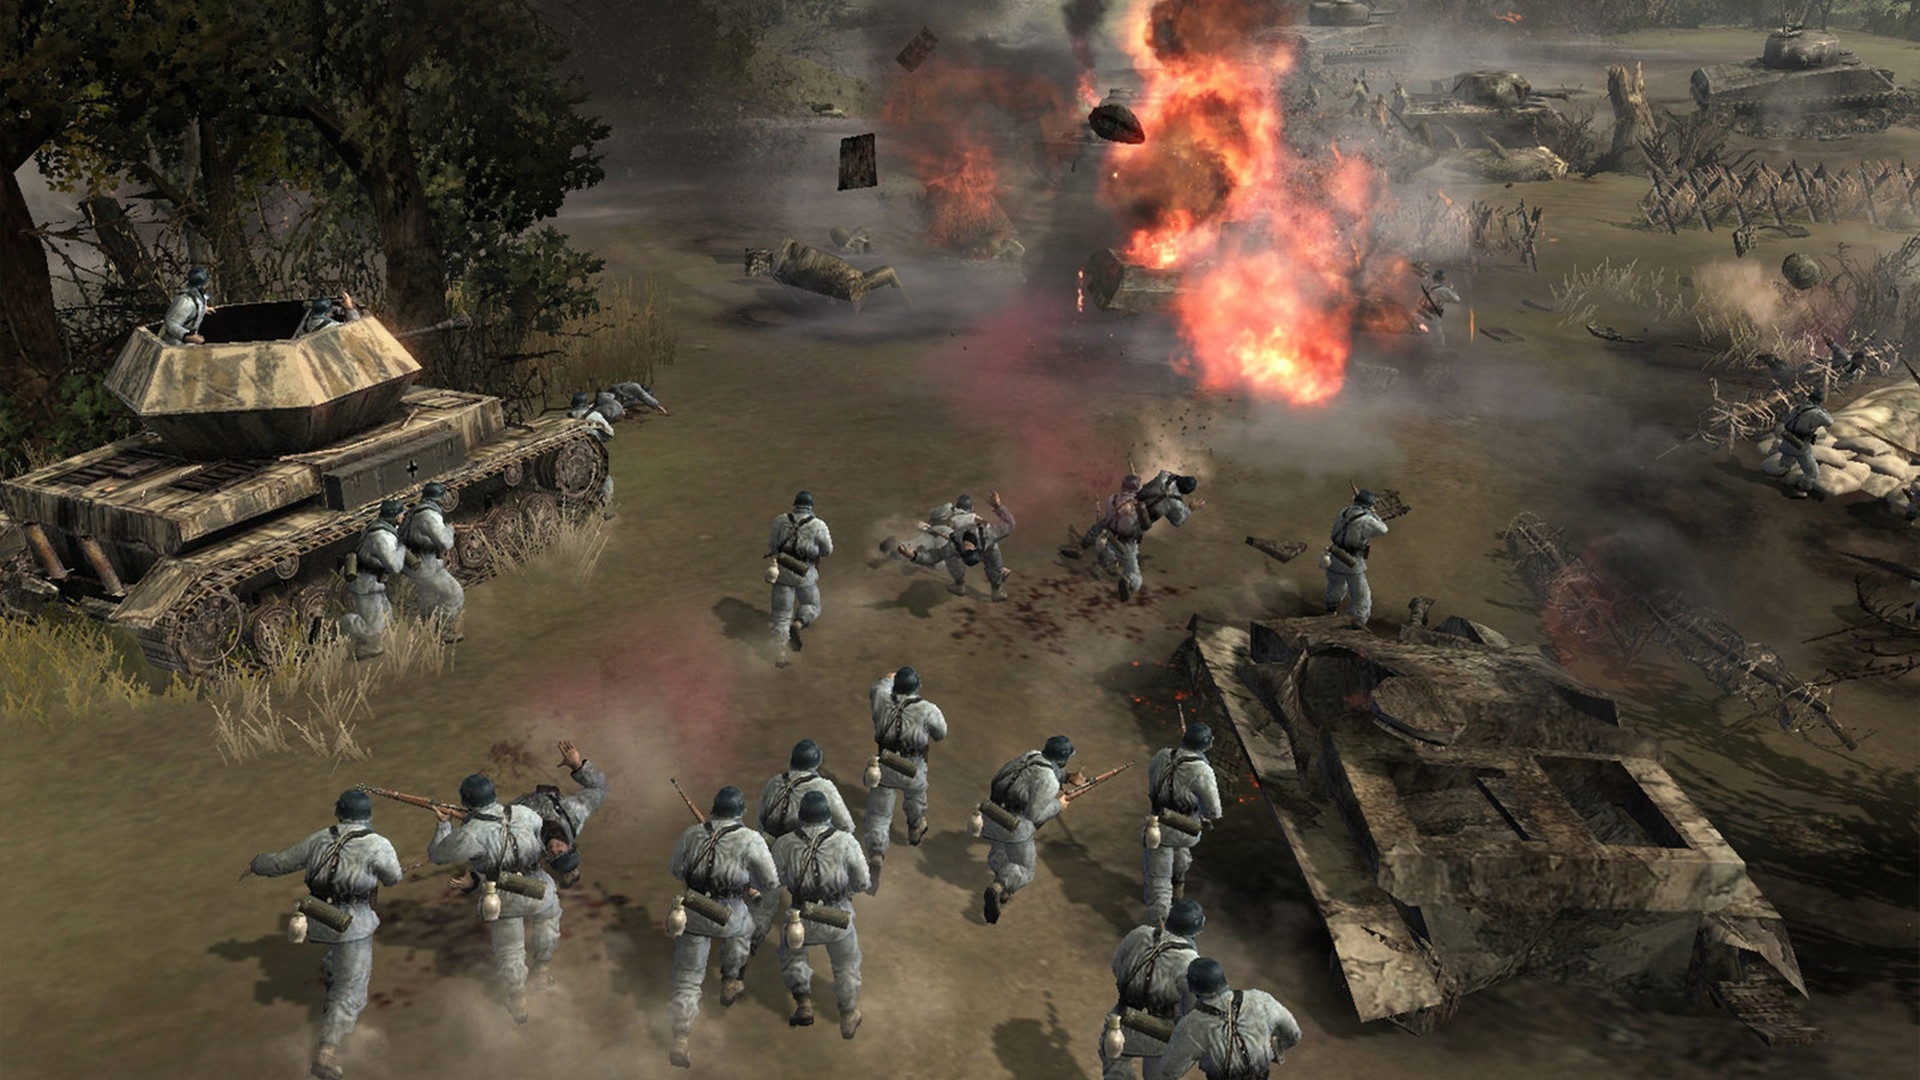 company of heroes 1 game download free full version windows 10